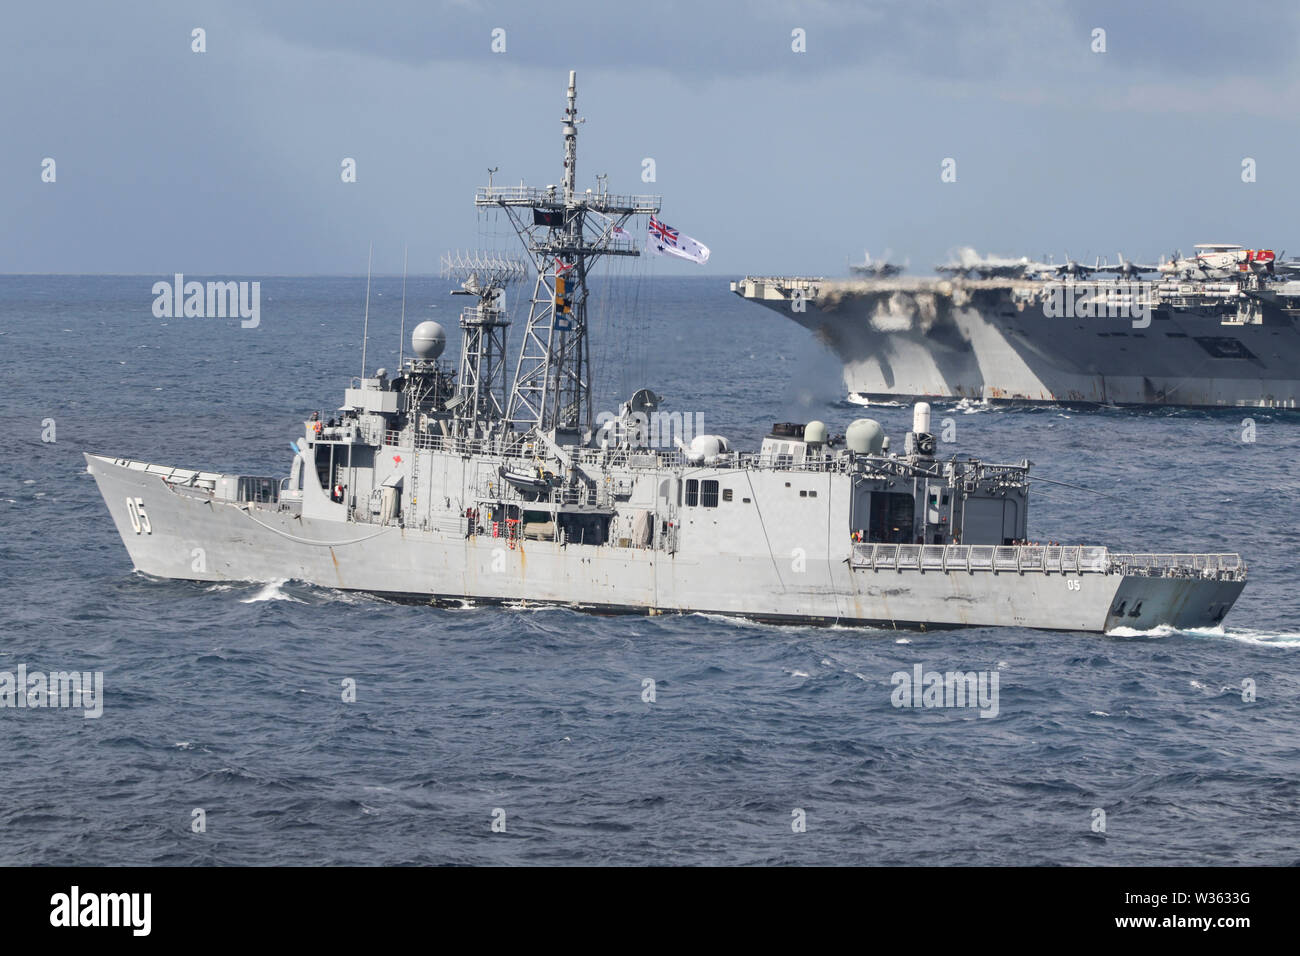 190711-N-DX072-1070 TASMAN SEA (July 11, 2019) The Royal Australian Navy Adelaide-class guided-missile frigate HMAS Melbourne (FFG 05), left, and U.S. Navy Nimitz-class aircraft carrier USS Ronald Reagan (CVN 76), transit with the amphibious transport dock ship USS Green Bay (LPD 20) in a photo exercise (PHOTOEX) during Talisman Sabre 2019. Green Bay, part of the Wasp Expeditionary Strike Group, with embarked 31st Marine Expeditionary Unit, is currently participating in Talisman Sabre 2019 off the coast of Northern Australia. A bilateral, biennial event, Talisman Sabre is designed to improve U Stock Photo